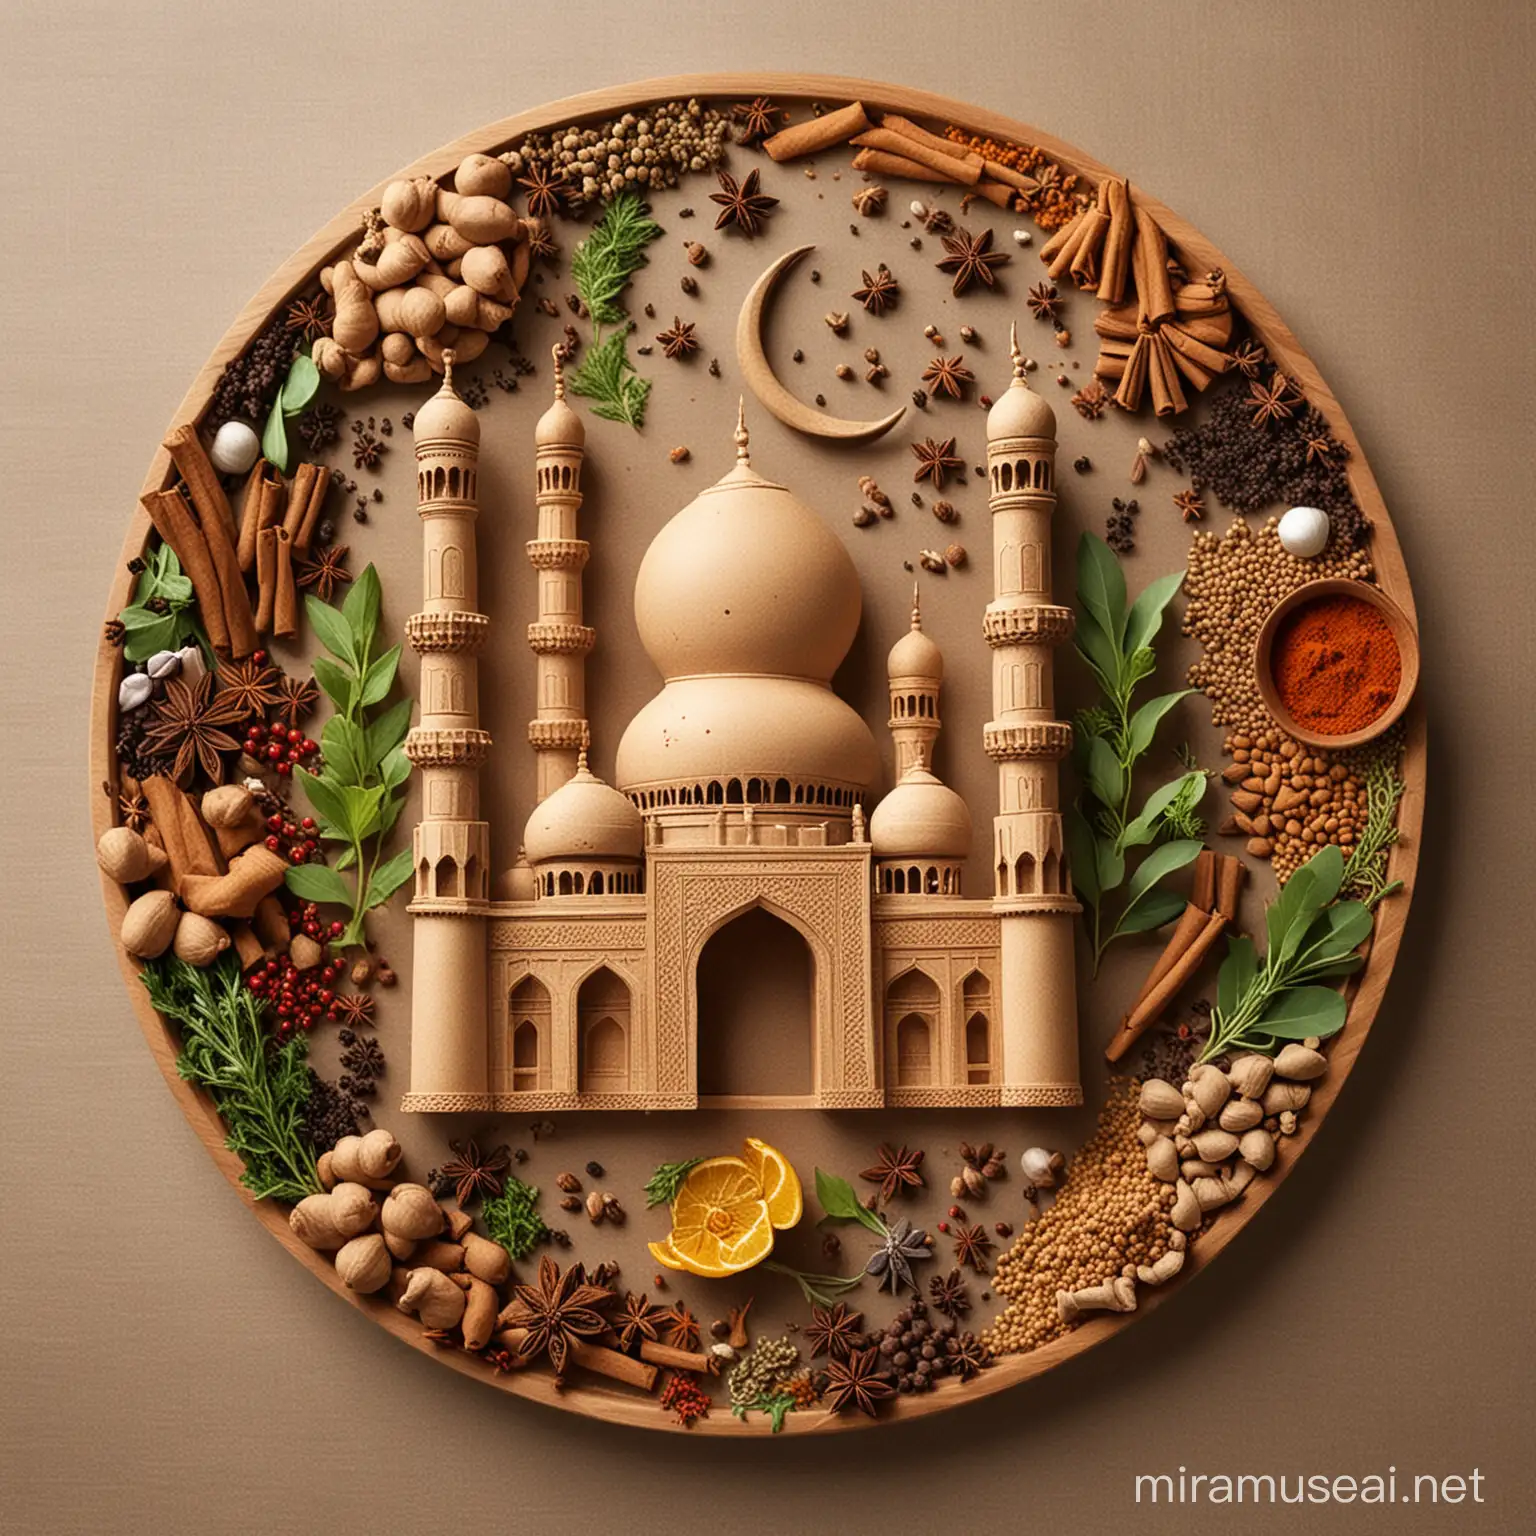 make post for Eid Mubarak night, let it be with mosque and some herbs & spices around it